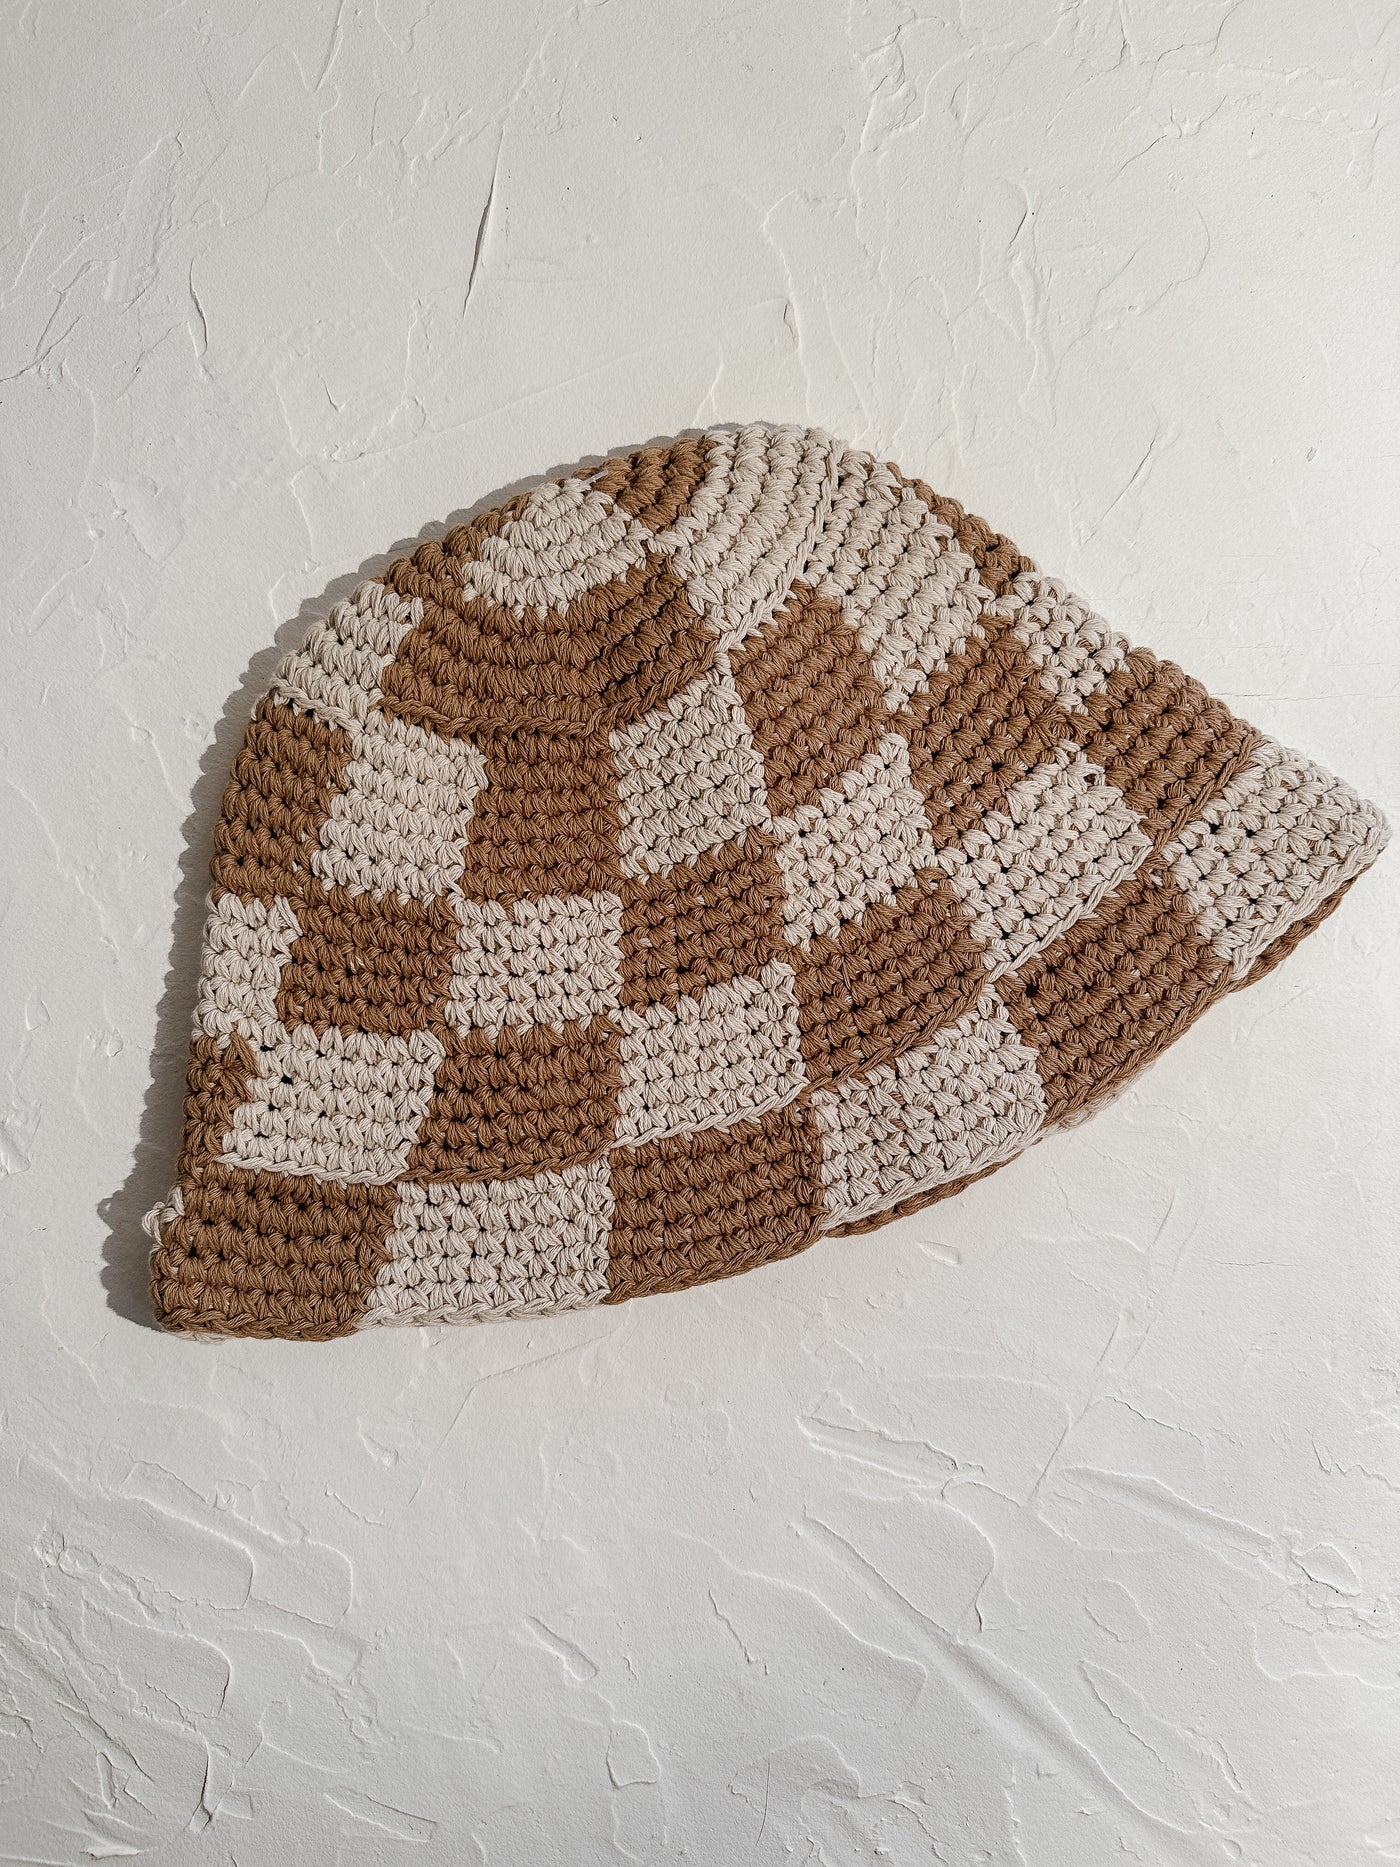 Fame Accessories Kids Crocheted Checkered Bucket Hat - Simple Good